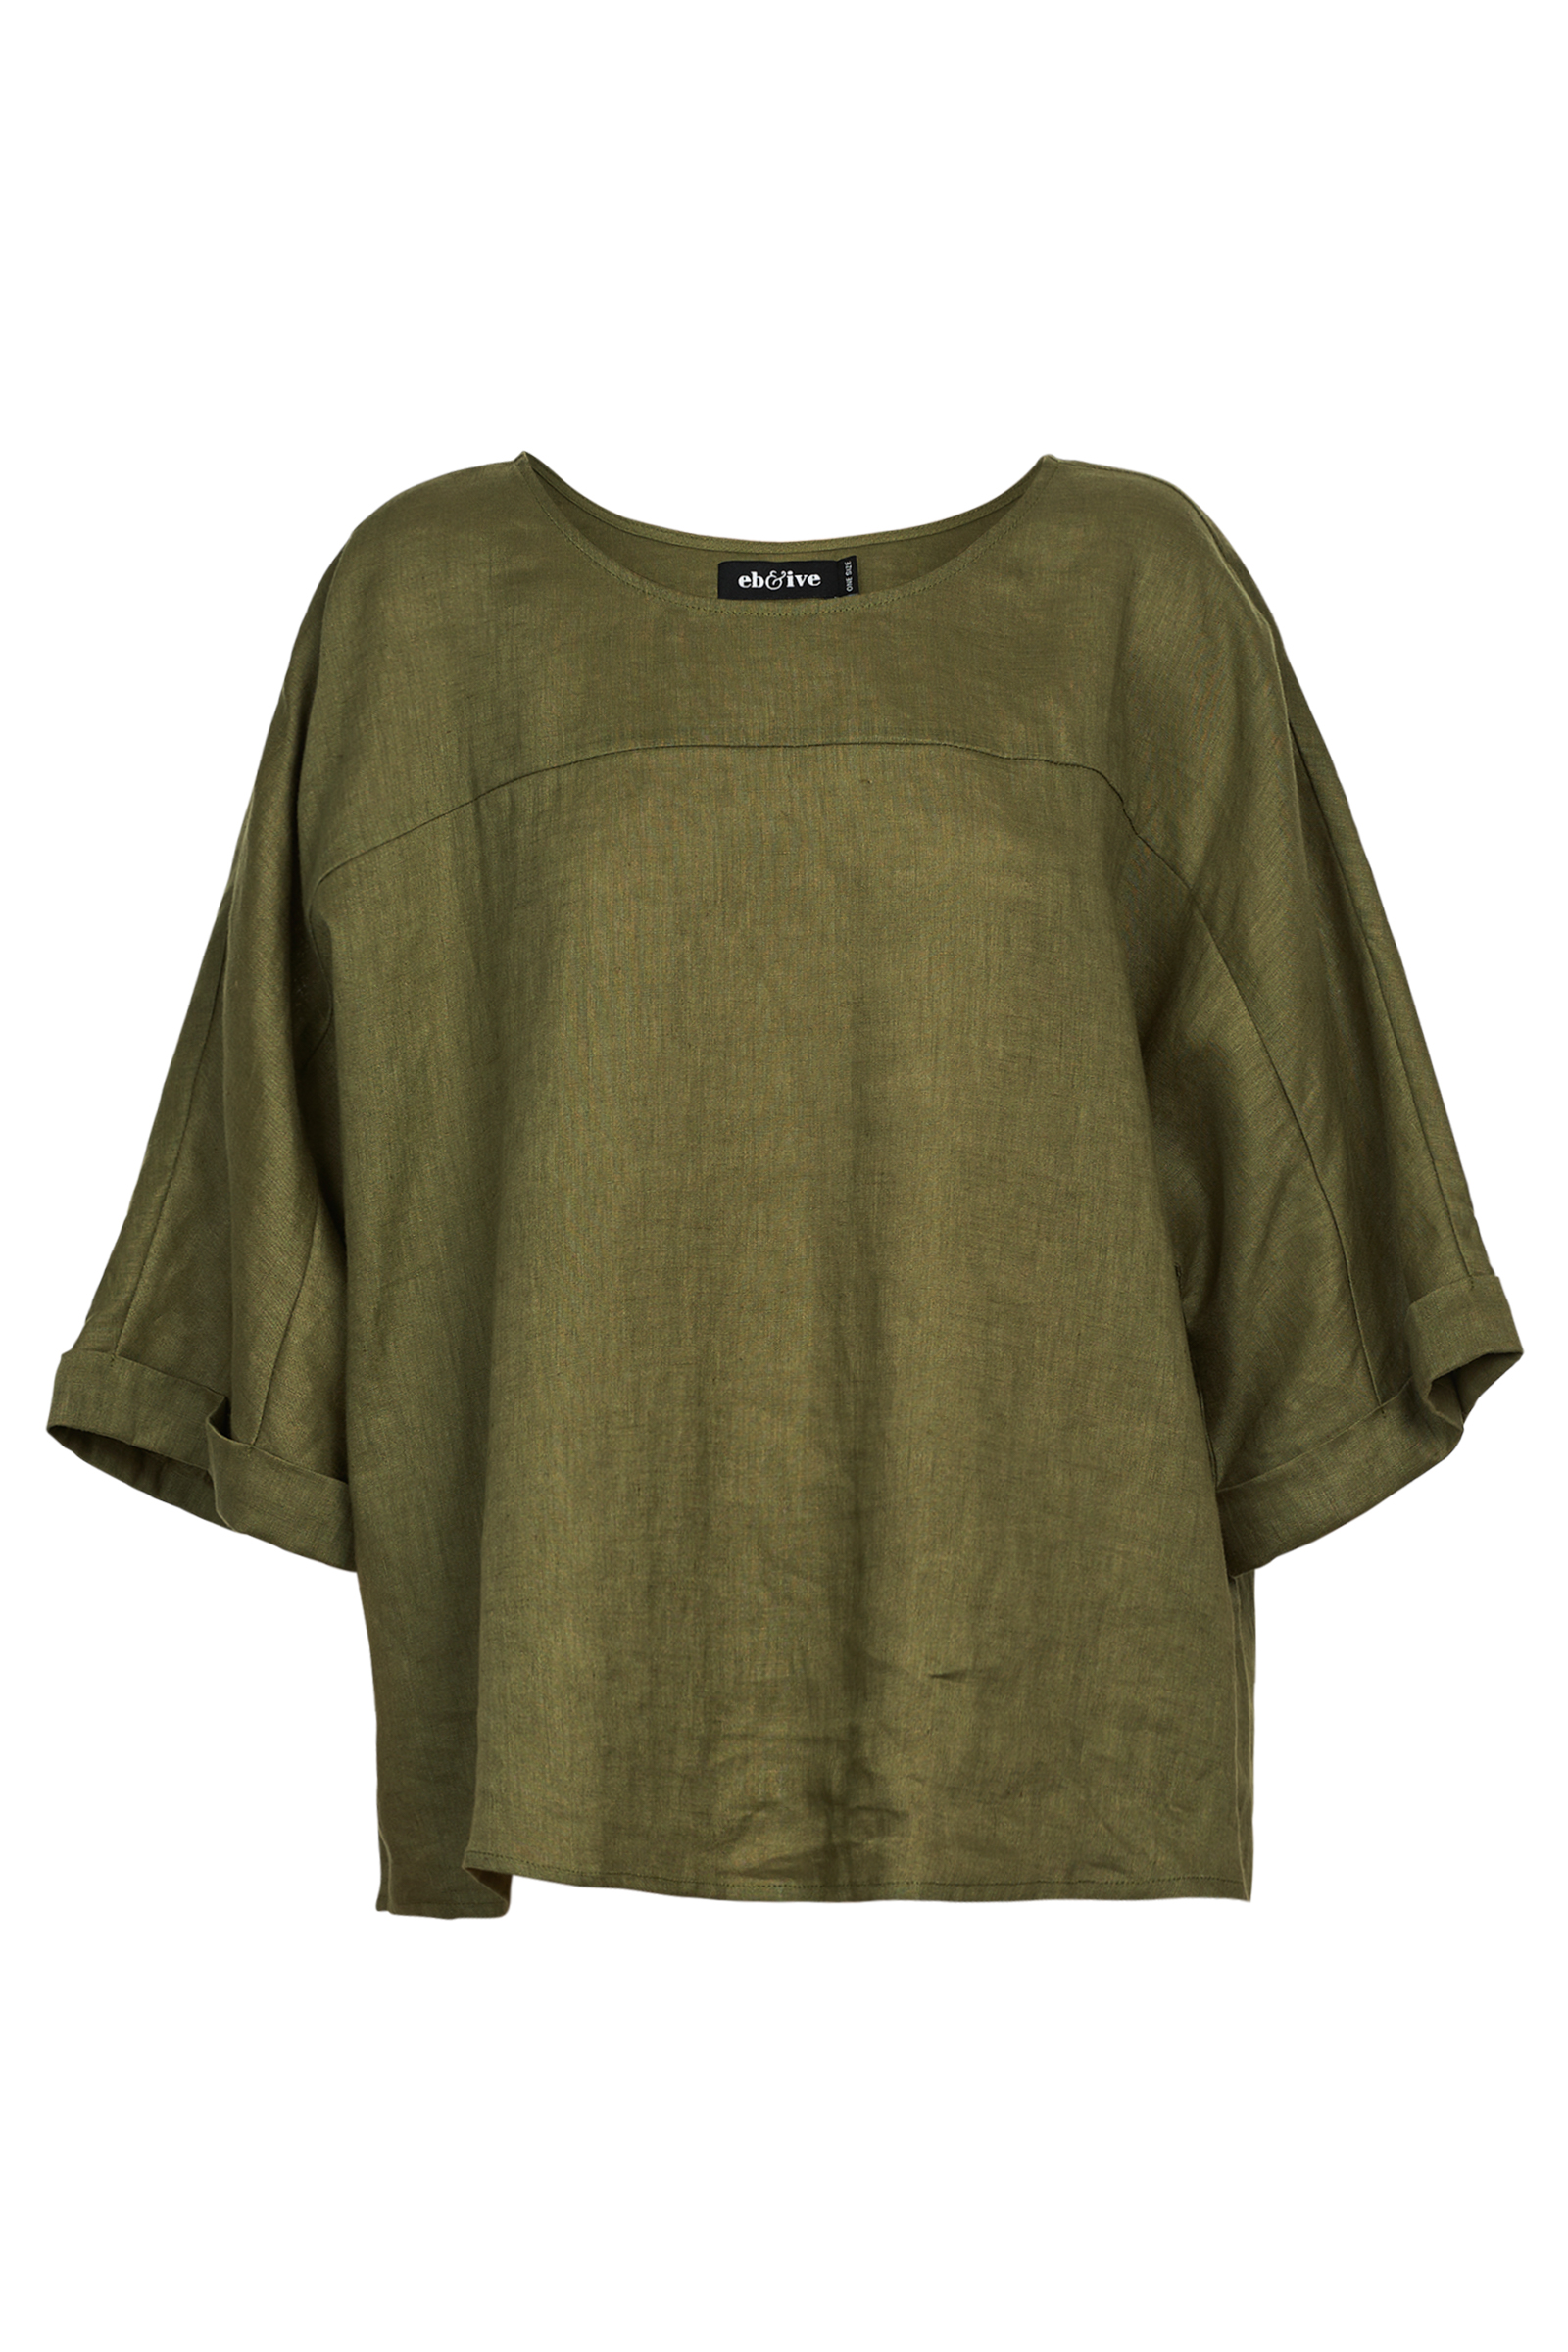 Eb & Ive Studio Relaxed Top